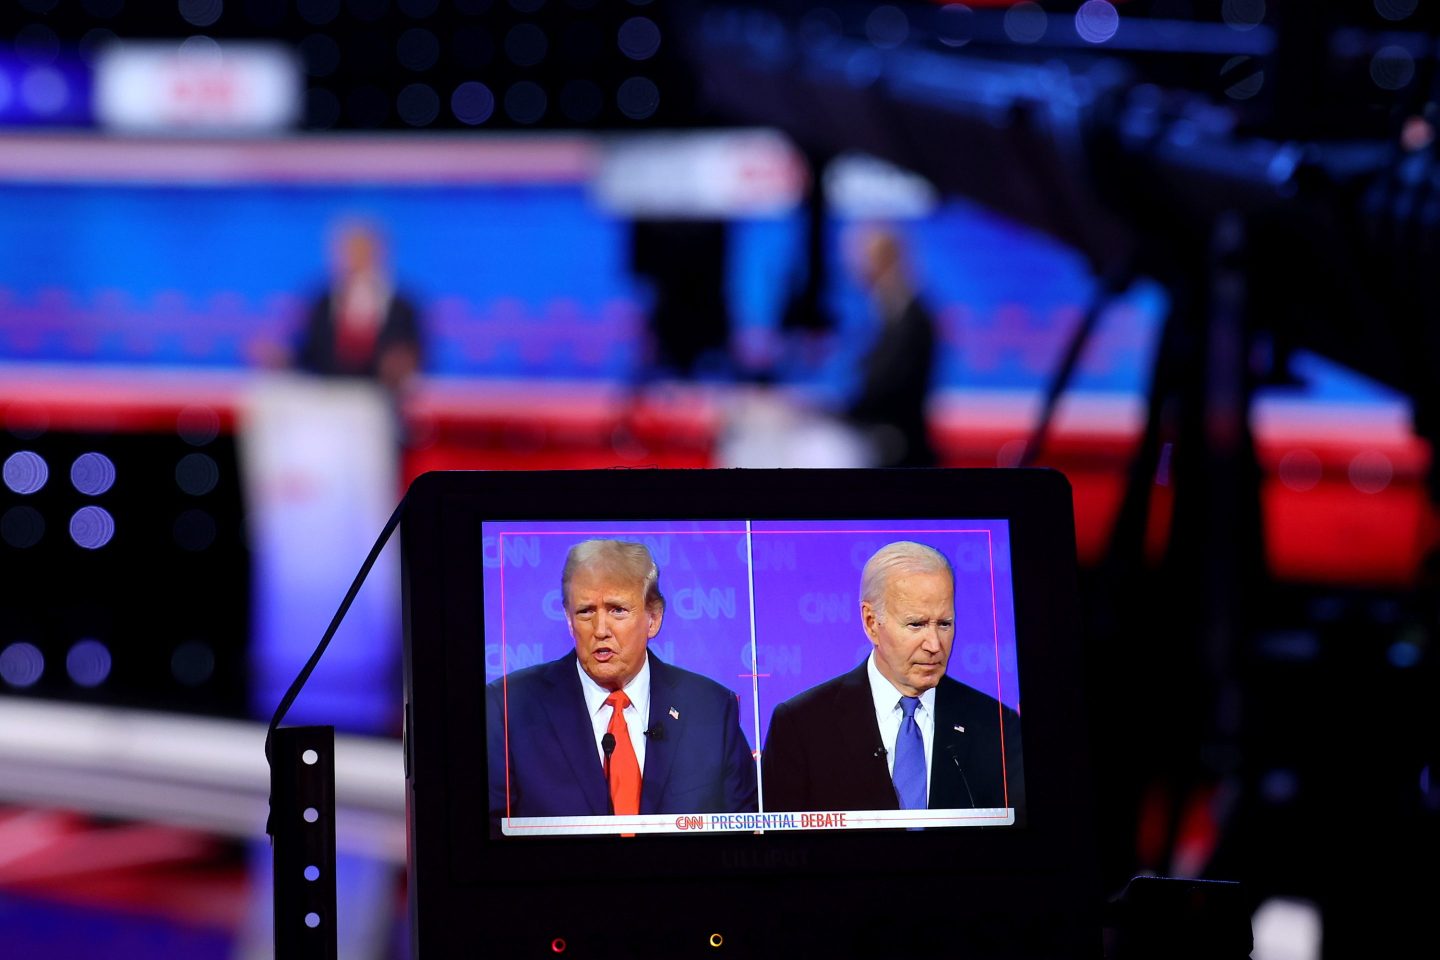 Split screen of Trump and Biden on a monitor at the recent debate